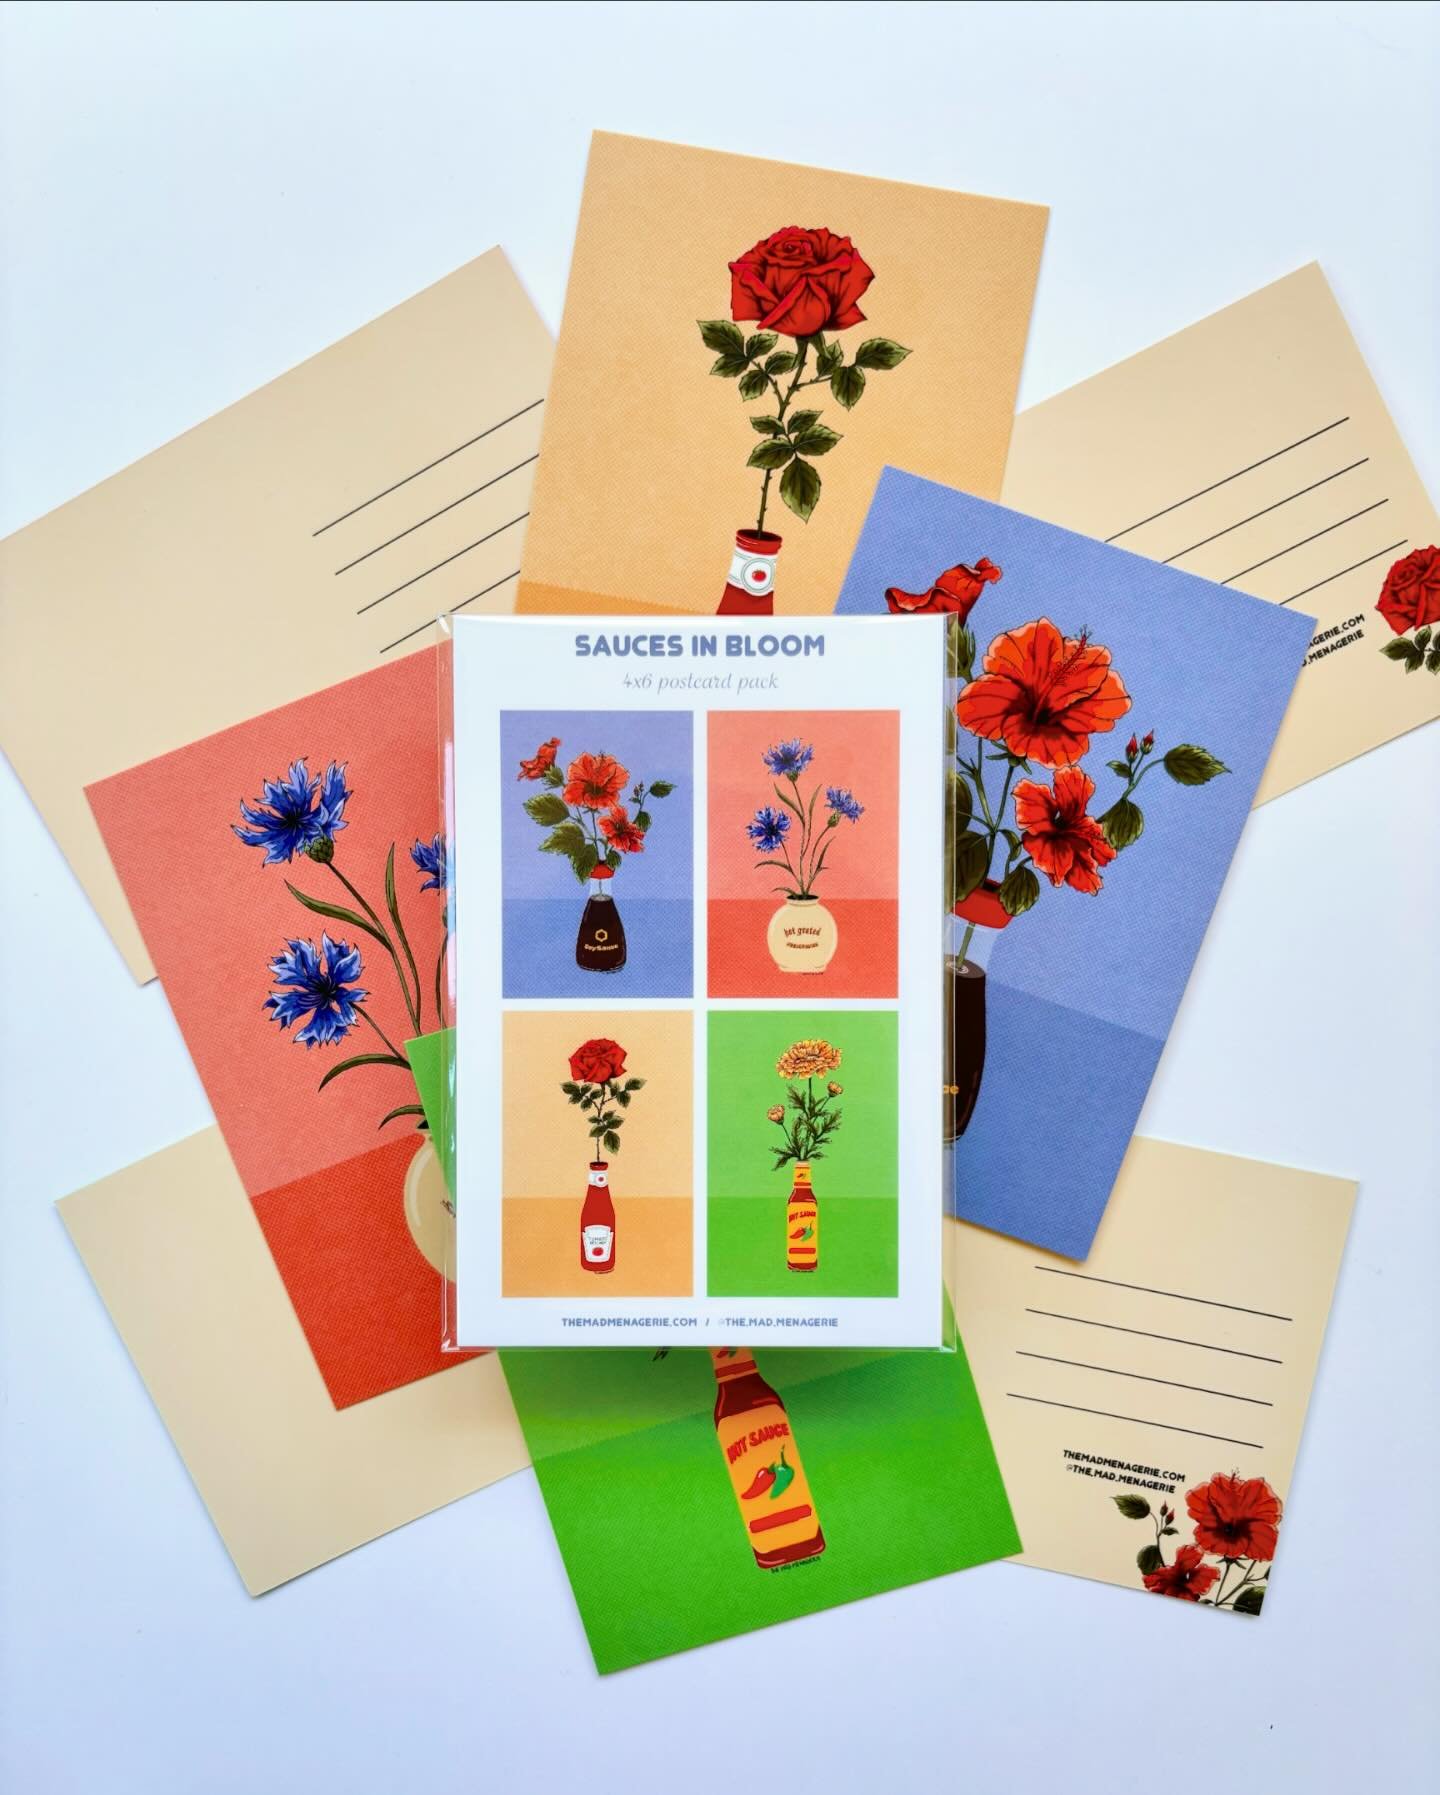 Sauces in Bloom: a beautiful tasty lil postcard pack 🌺 

Hibiscus in Soy Sauce
Cornflower in Horseradish
Rose in Ketchup
Marigold in Hot Sauce

Available online or at pop-ups. 

#postcard #postcards #usps #sauce #flower #snailmail #newmerch #shoploc